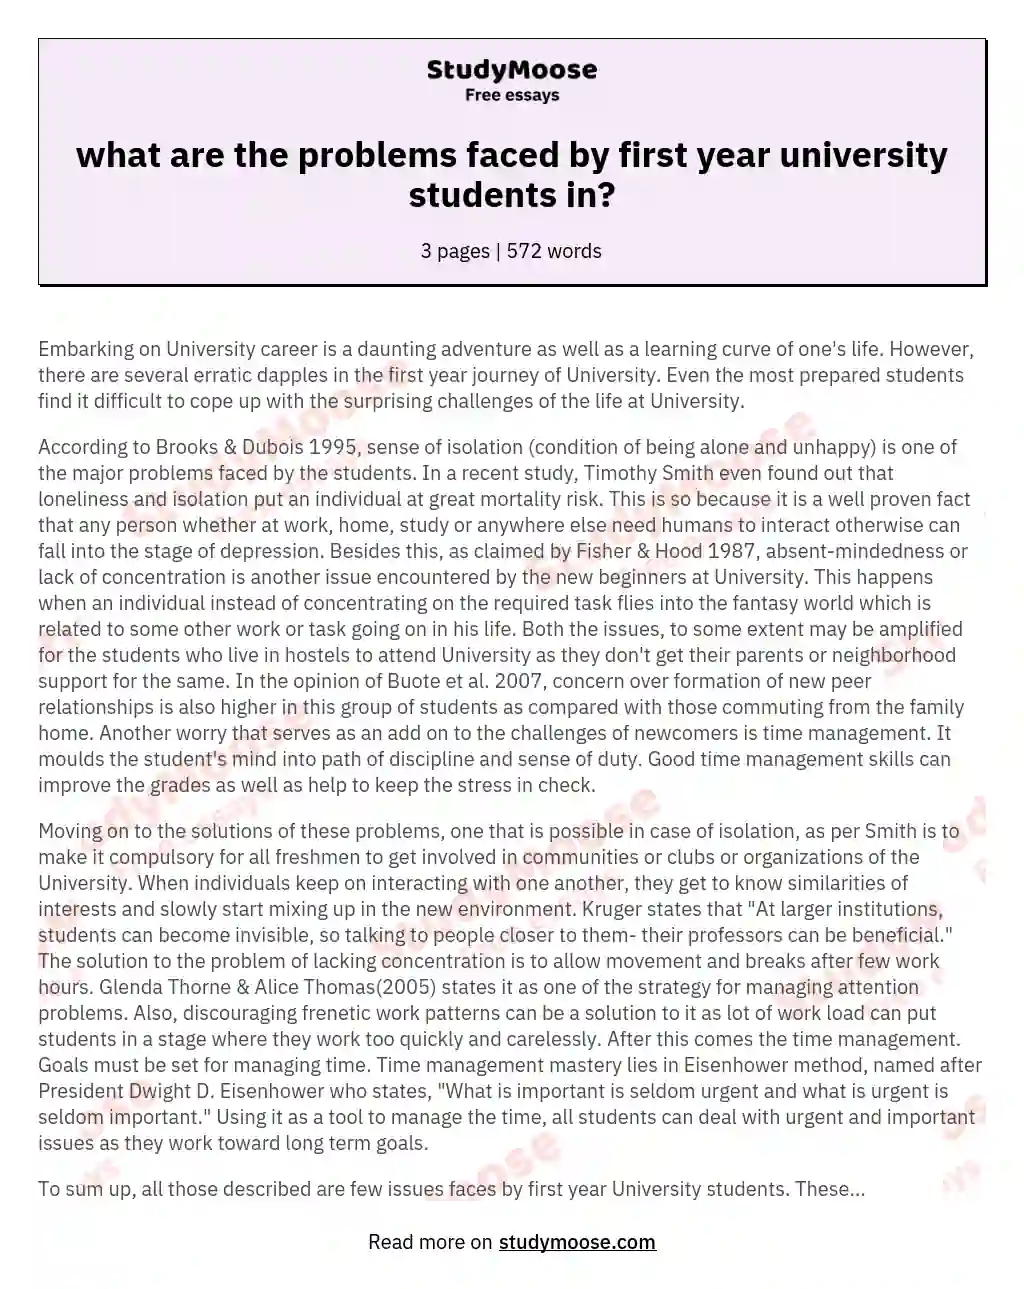 what are the problems faced by first year university students in?